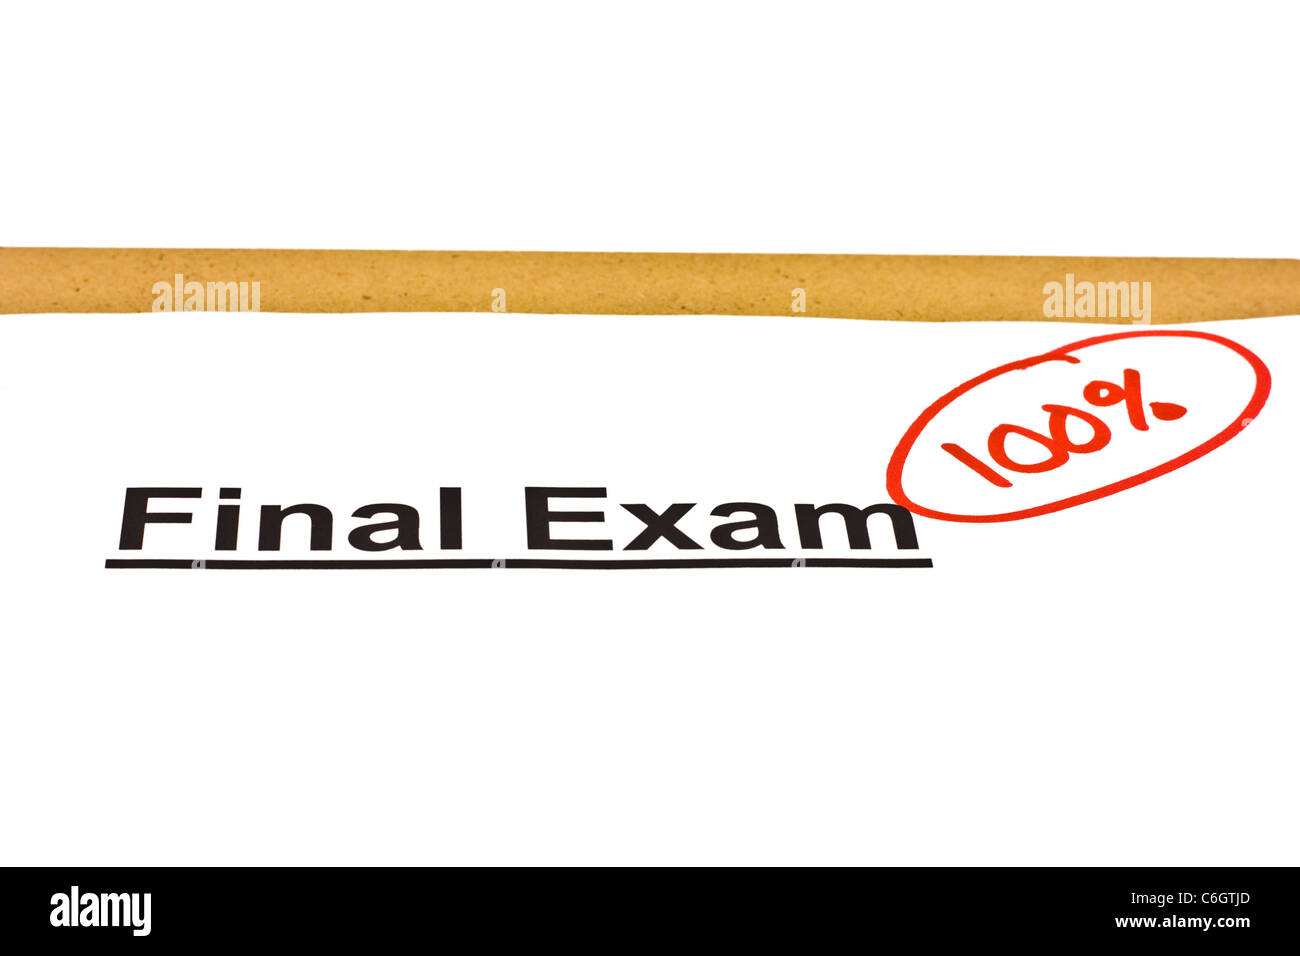 Final exam marked with 100% isolated on white. Stock Photo